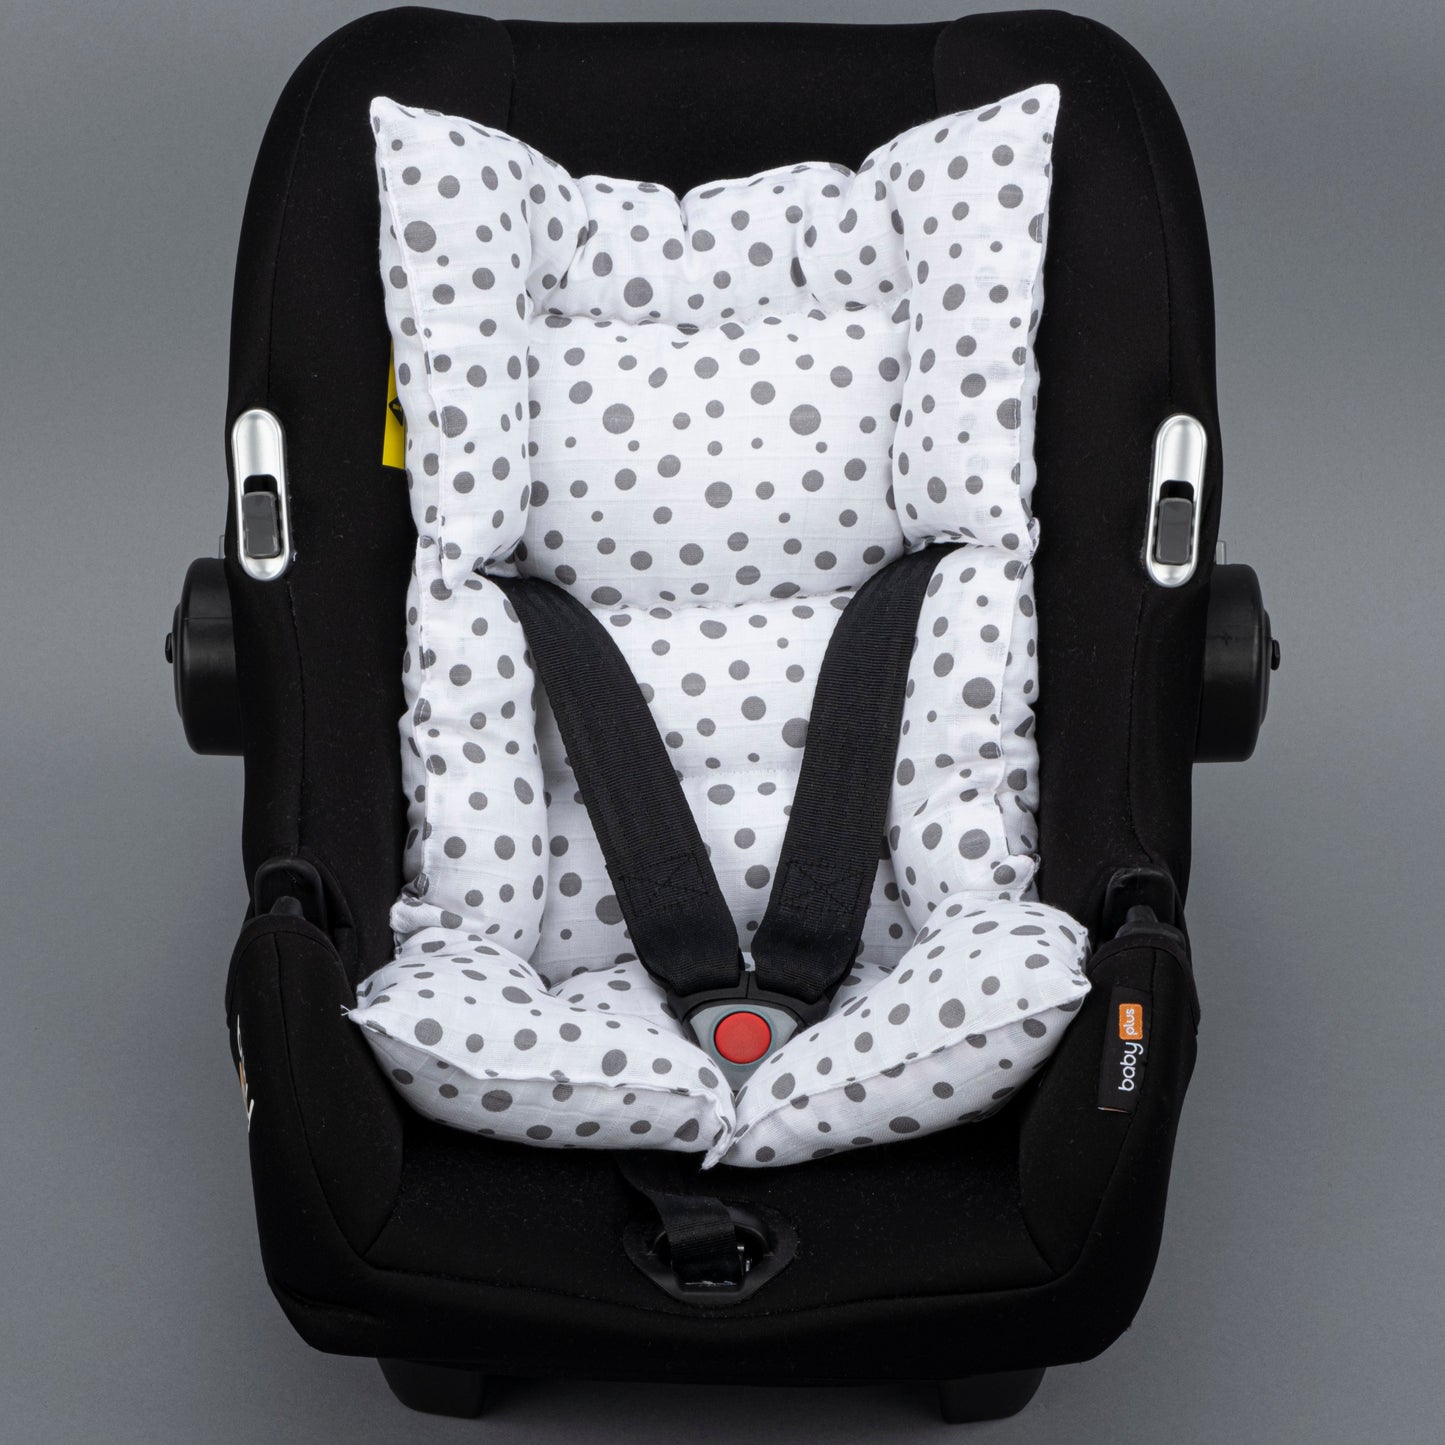 Stroller Cover Set - Single Side - Small Polka Dots